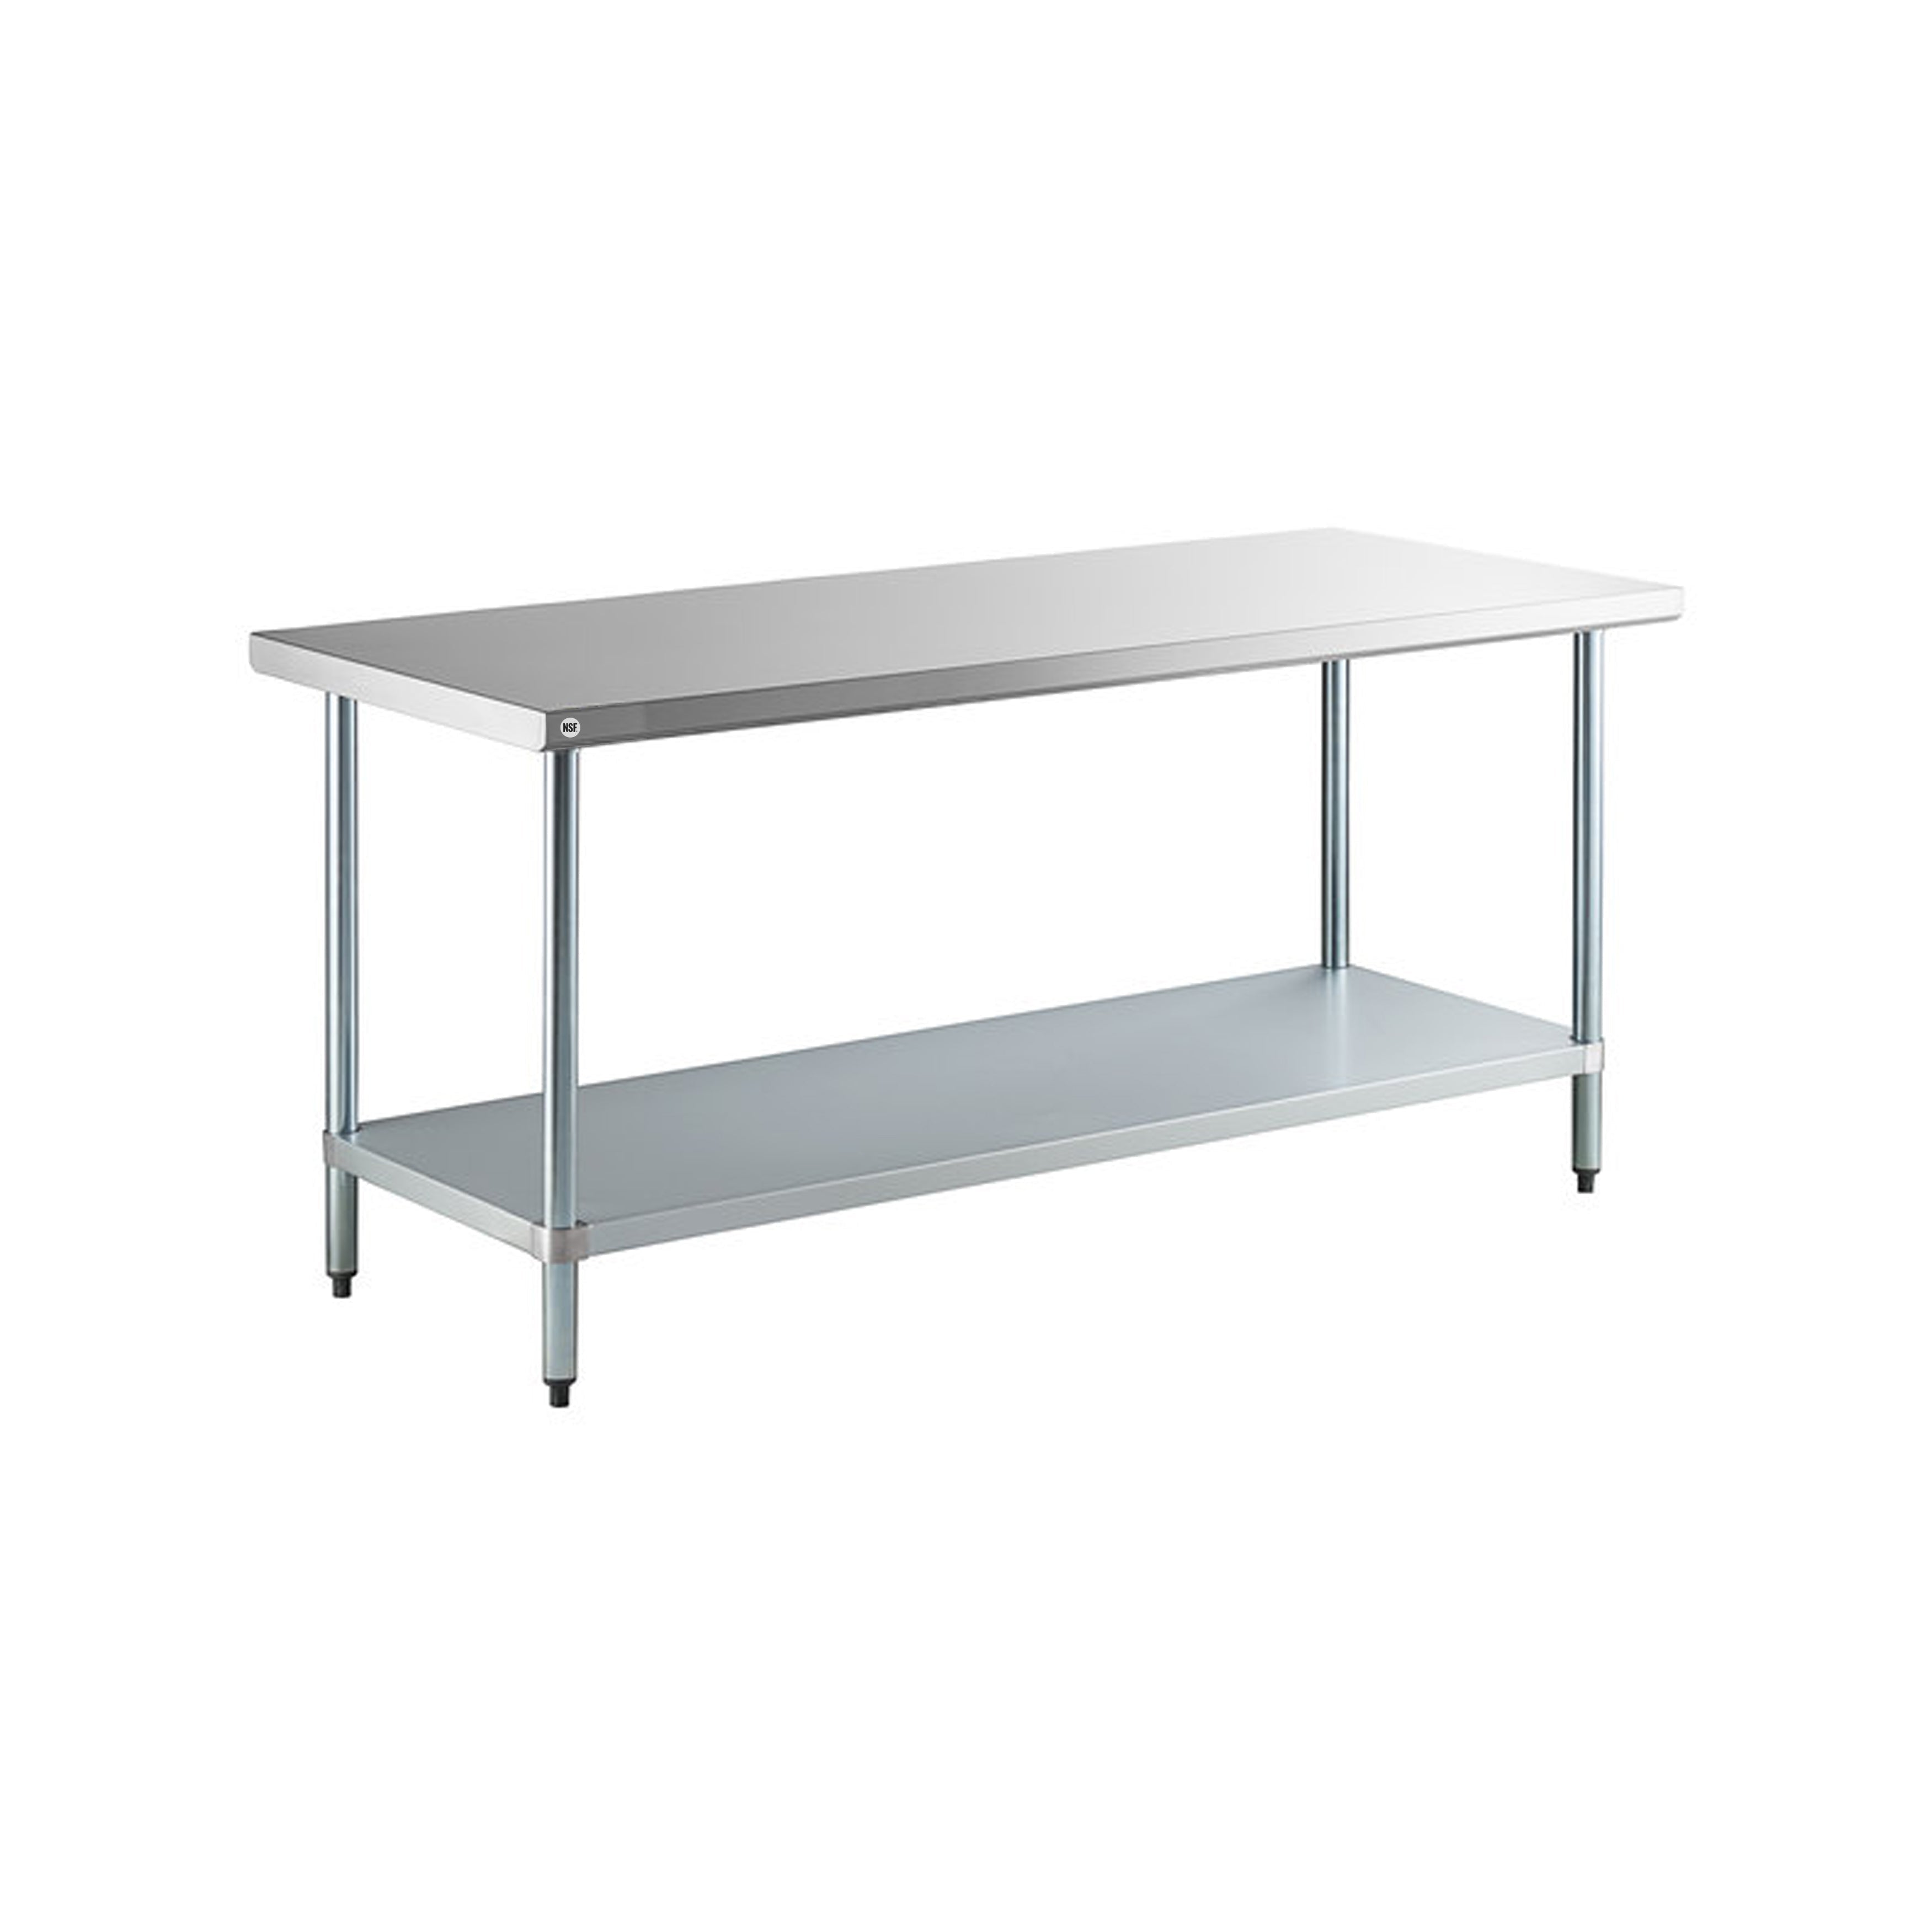 Omcan - 20198, Commercial 84" x 24" Stainless Steel Kitchen Work Table 1500lbs Medium Duty